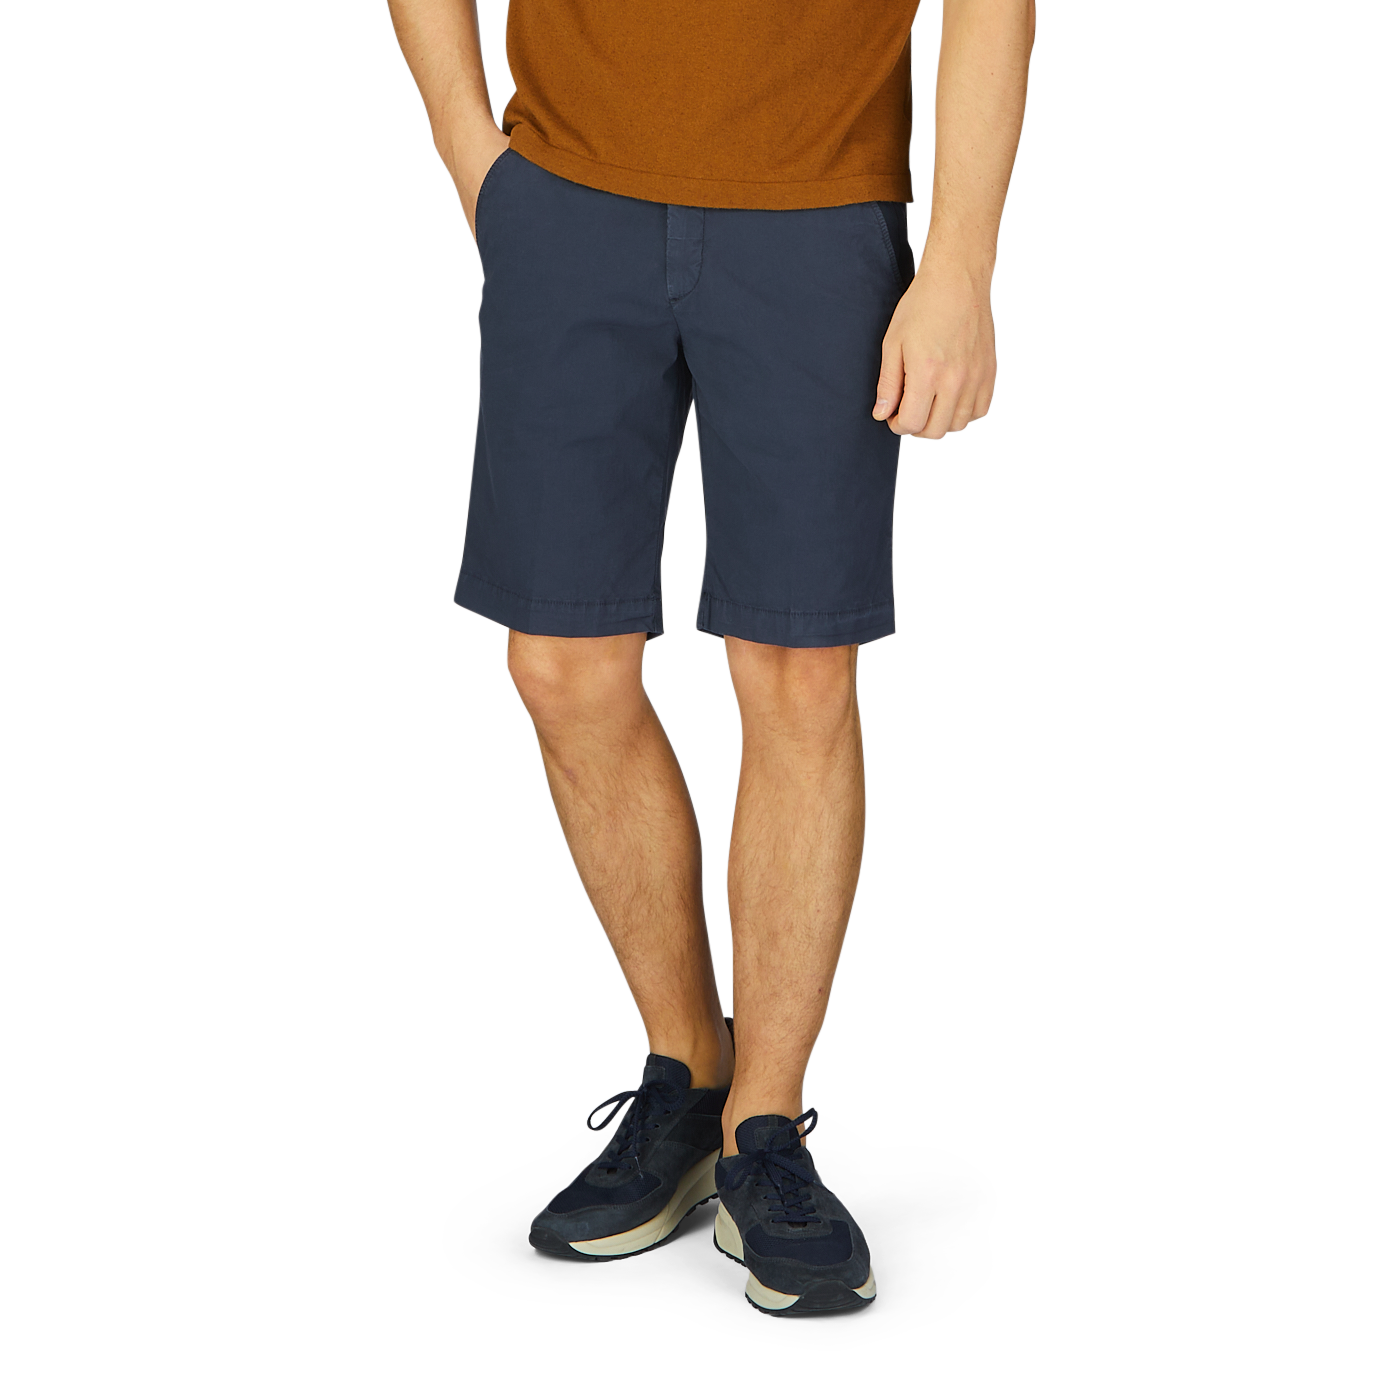 Man standing in Navy Blue Cotton Drawstring Malibu Shorts with an adjustable waistband from Briglia and sneakers.